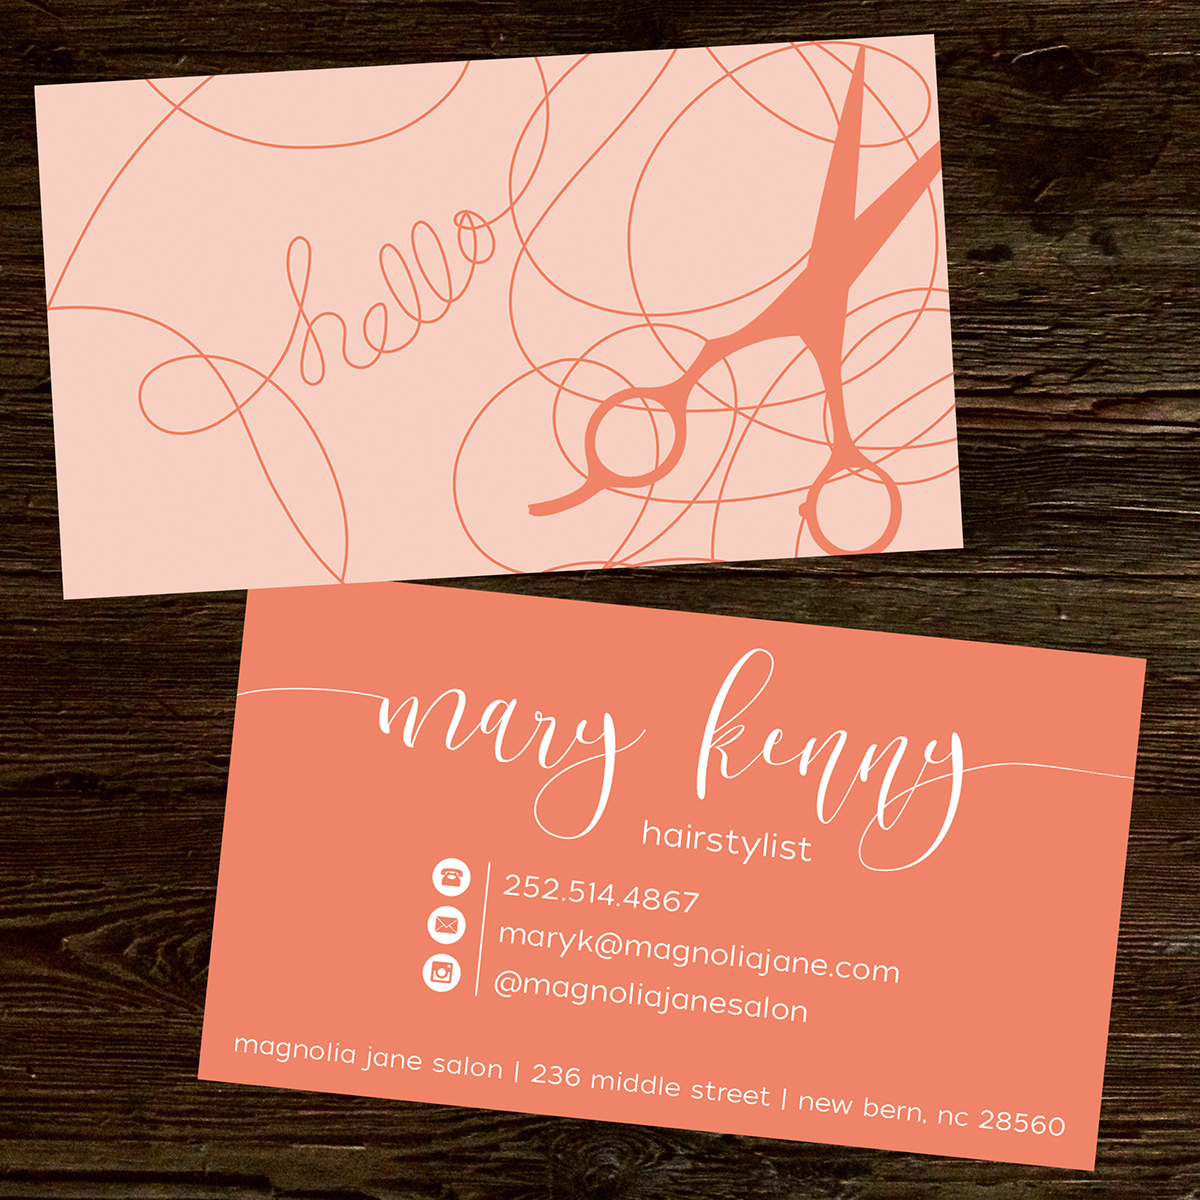 hairstylist business cards 1